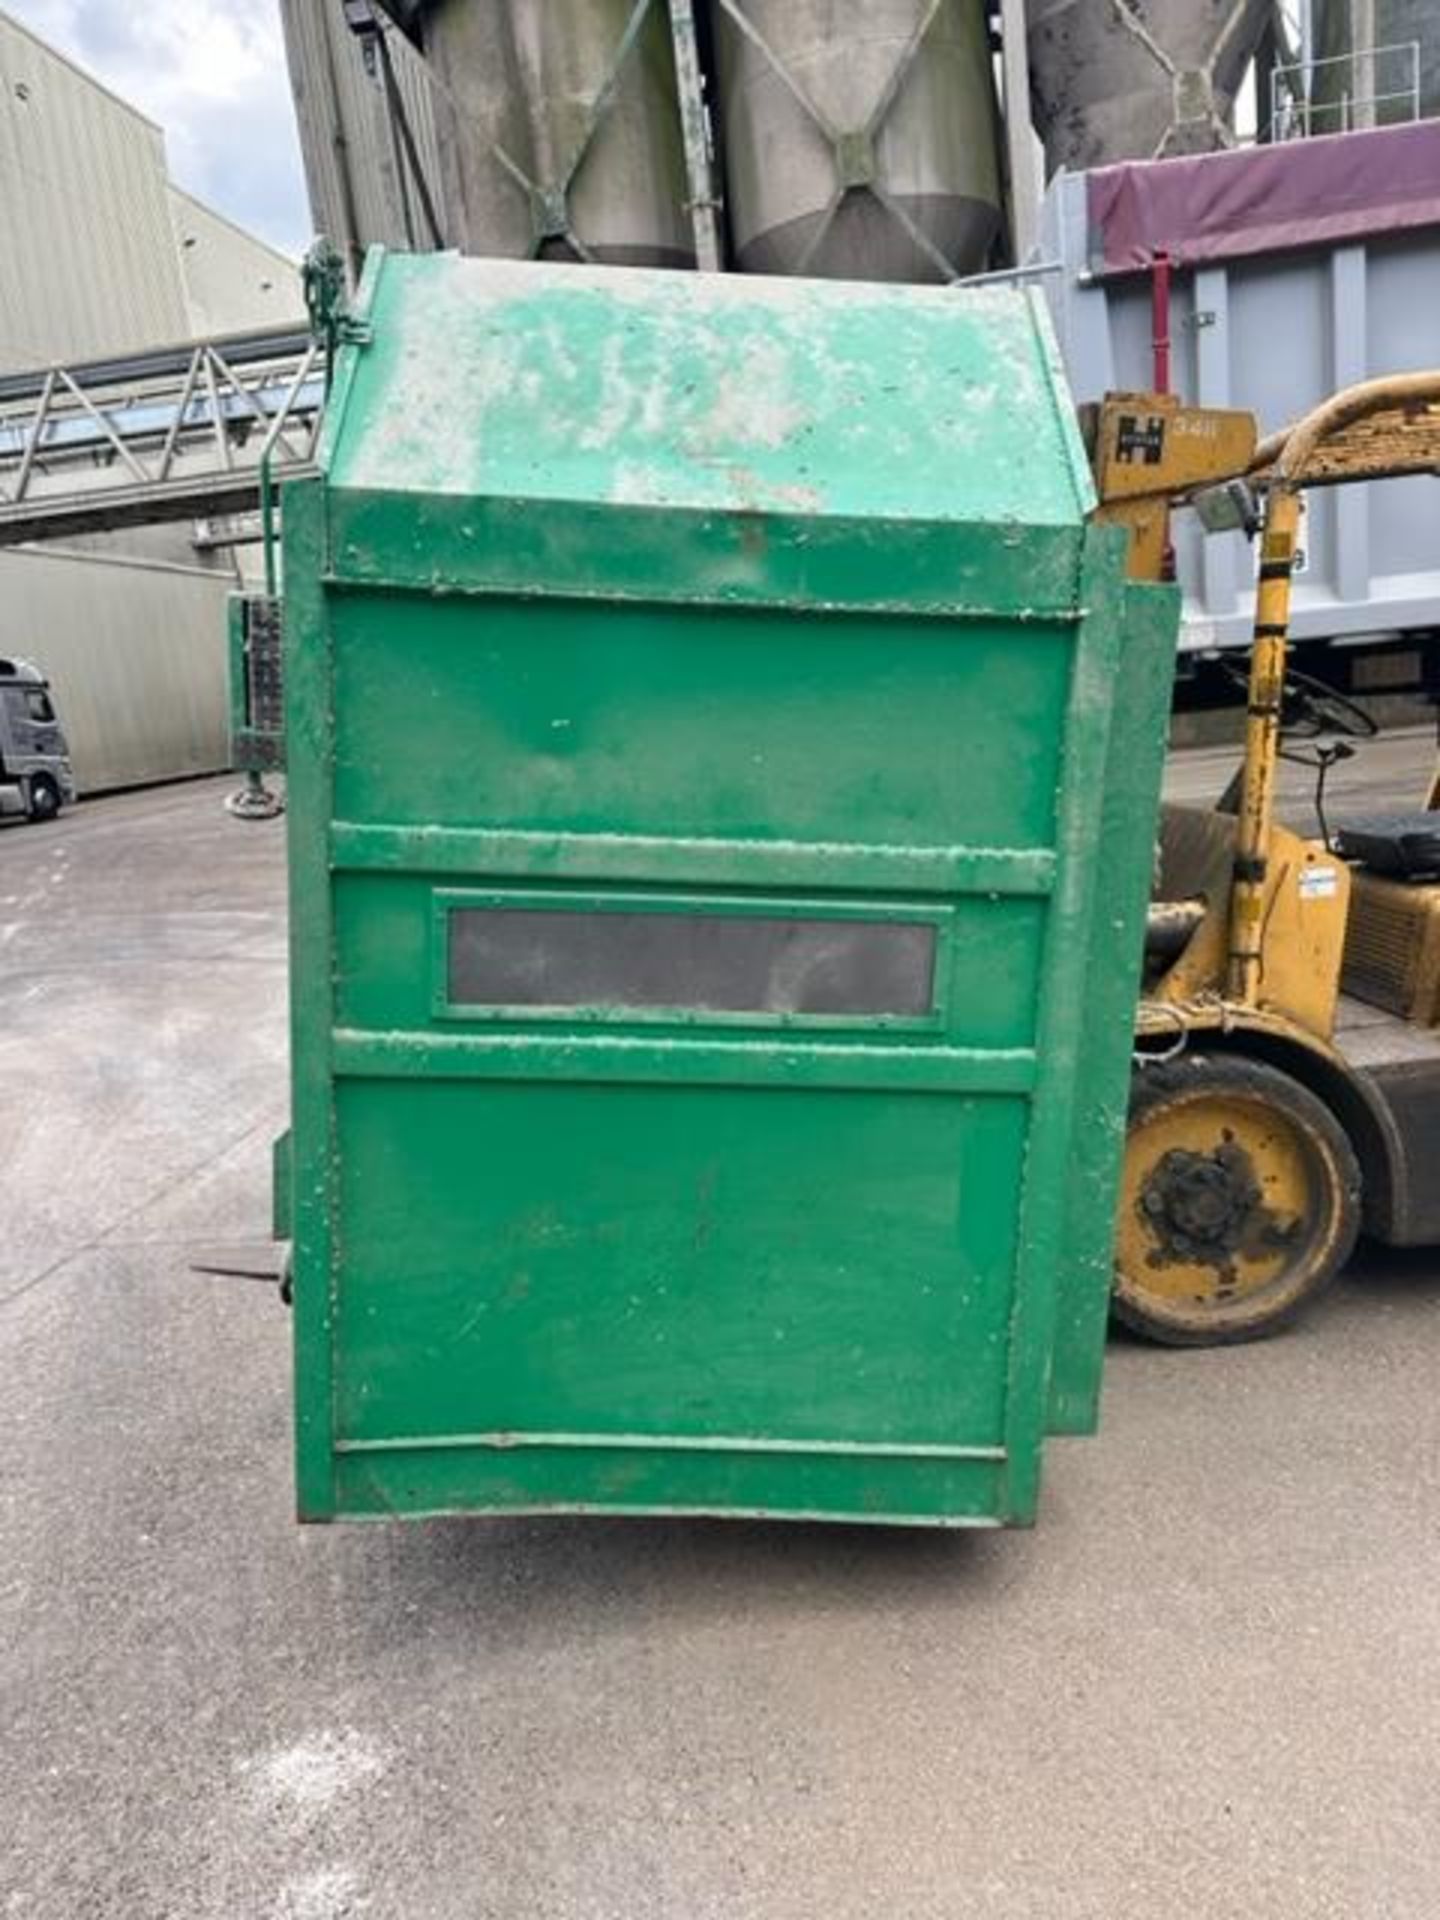 Westrup SAB-1000 Pre Cleaner Machine (no aspiration fan). Loading free of charge - yes. Lot location - Image 5 of 15